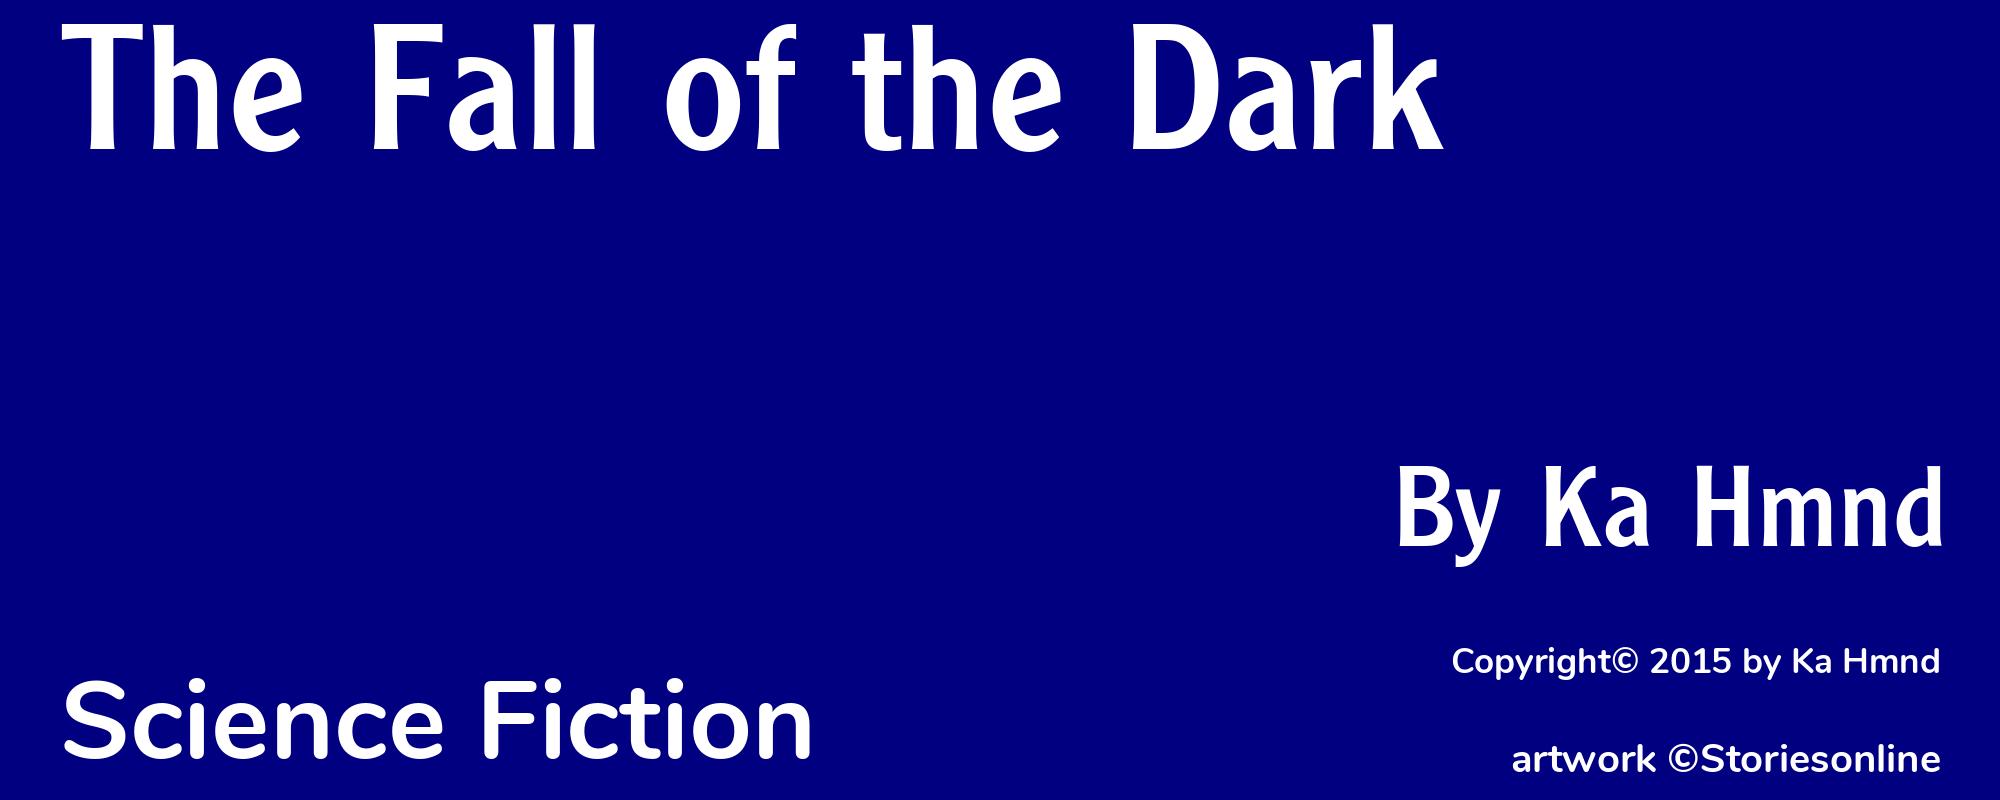 The Fall of the Dark - Cover